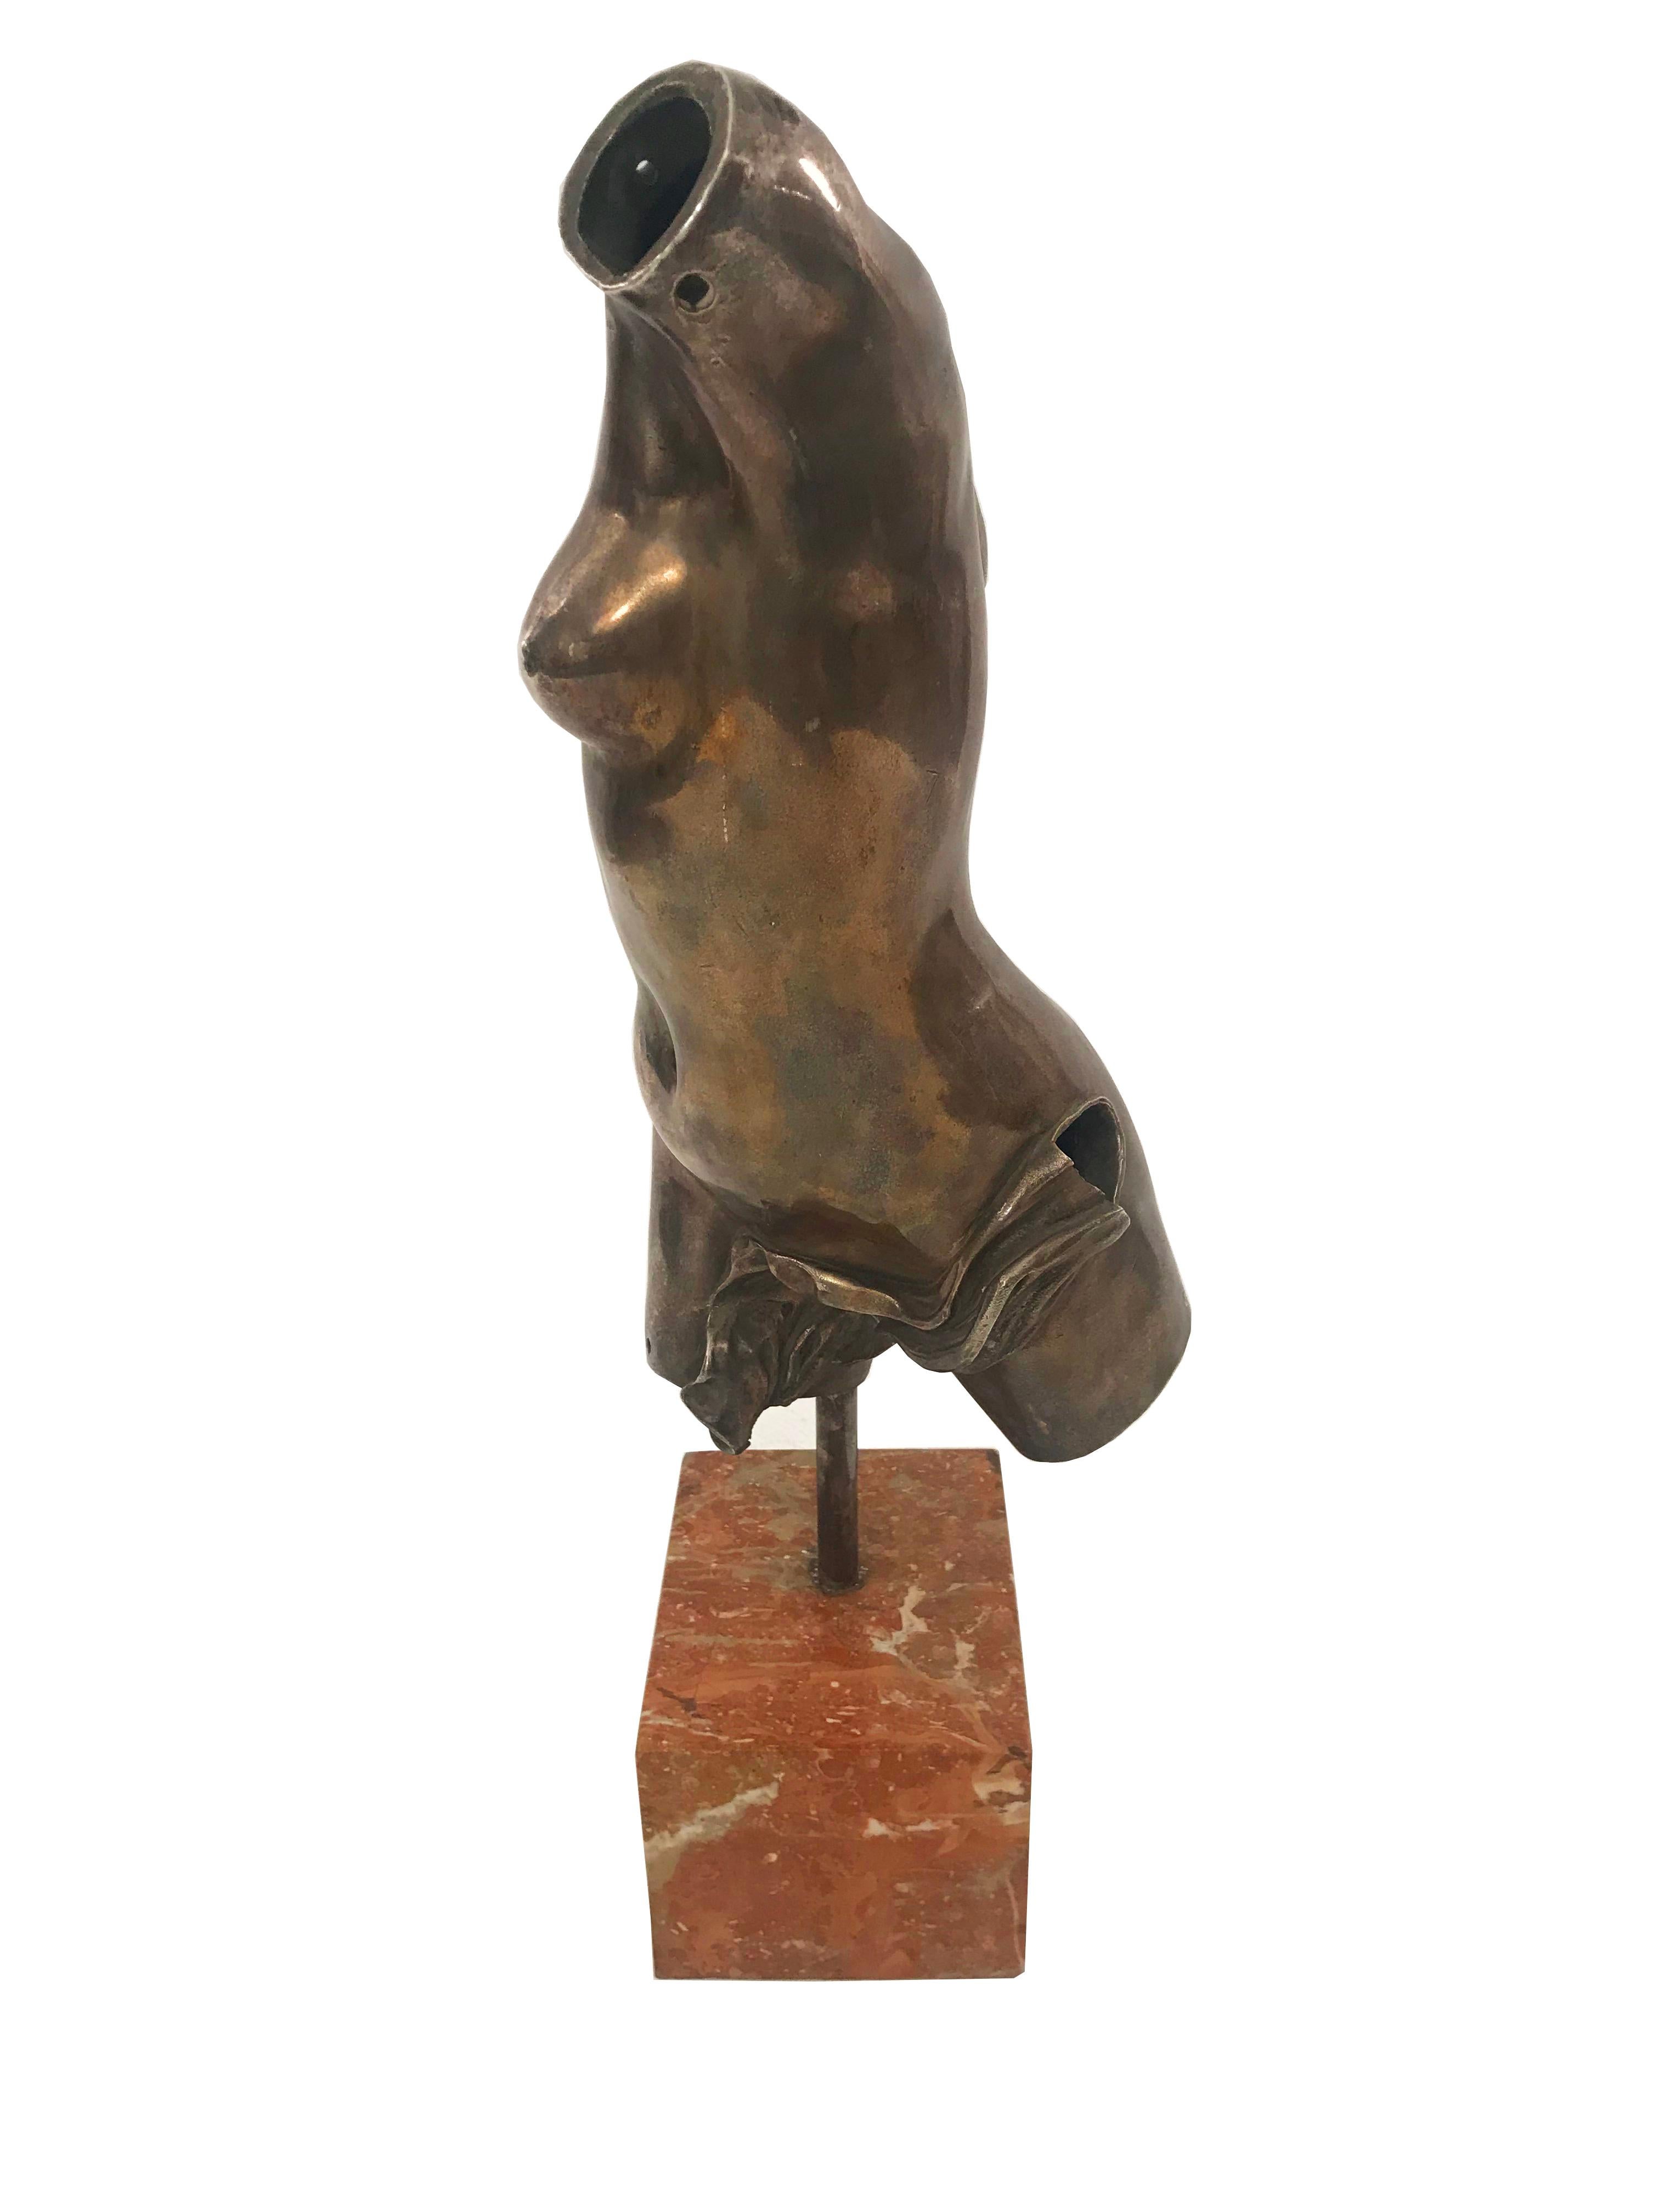 Italian Neo-Classic style (20th c.) silvered bronze sculpture of a nude torso mounted on a rouge square marble base.
